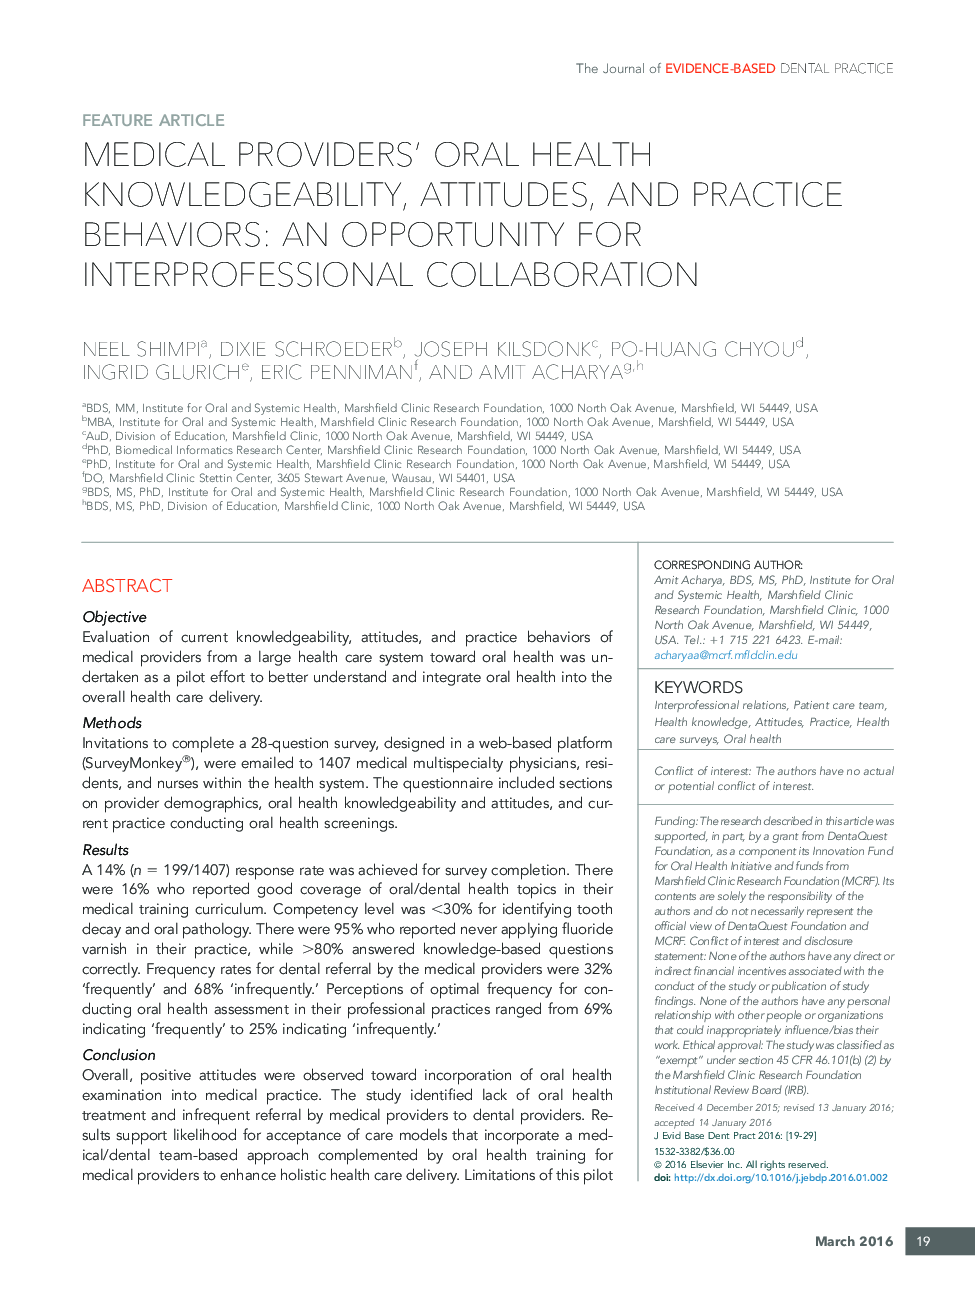 Medical Providers' Oral Health Knowledgeability, Attitudes, and Practice Behaviors: An Opportunity for Interprofessional Collaboration 